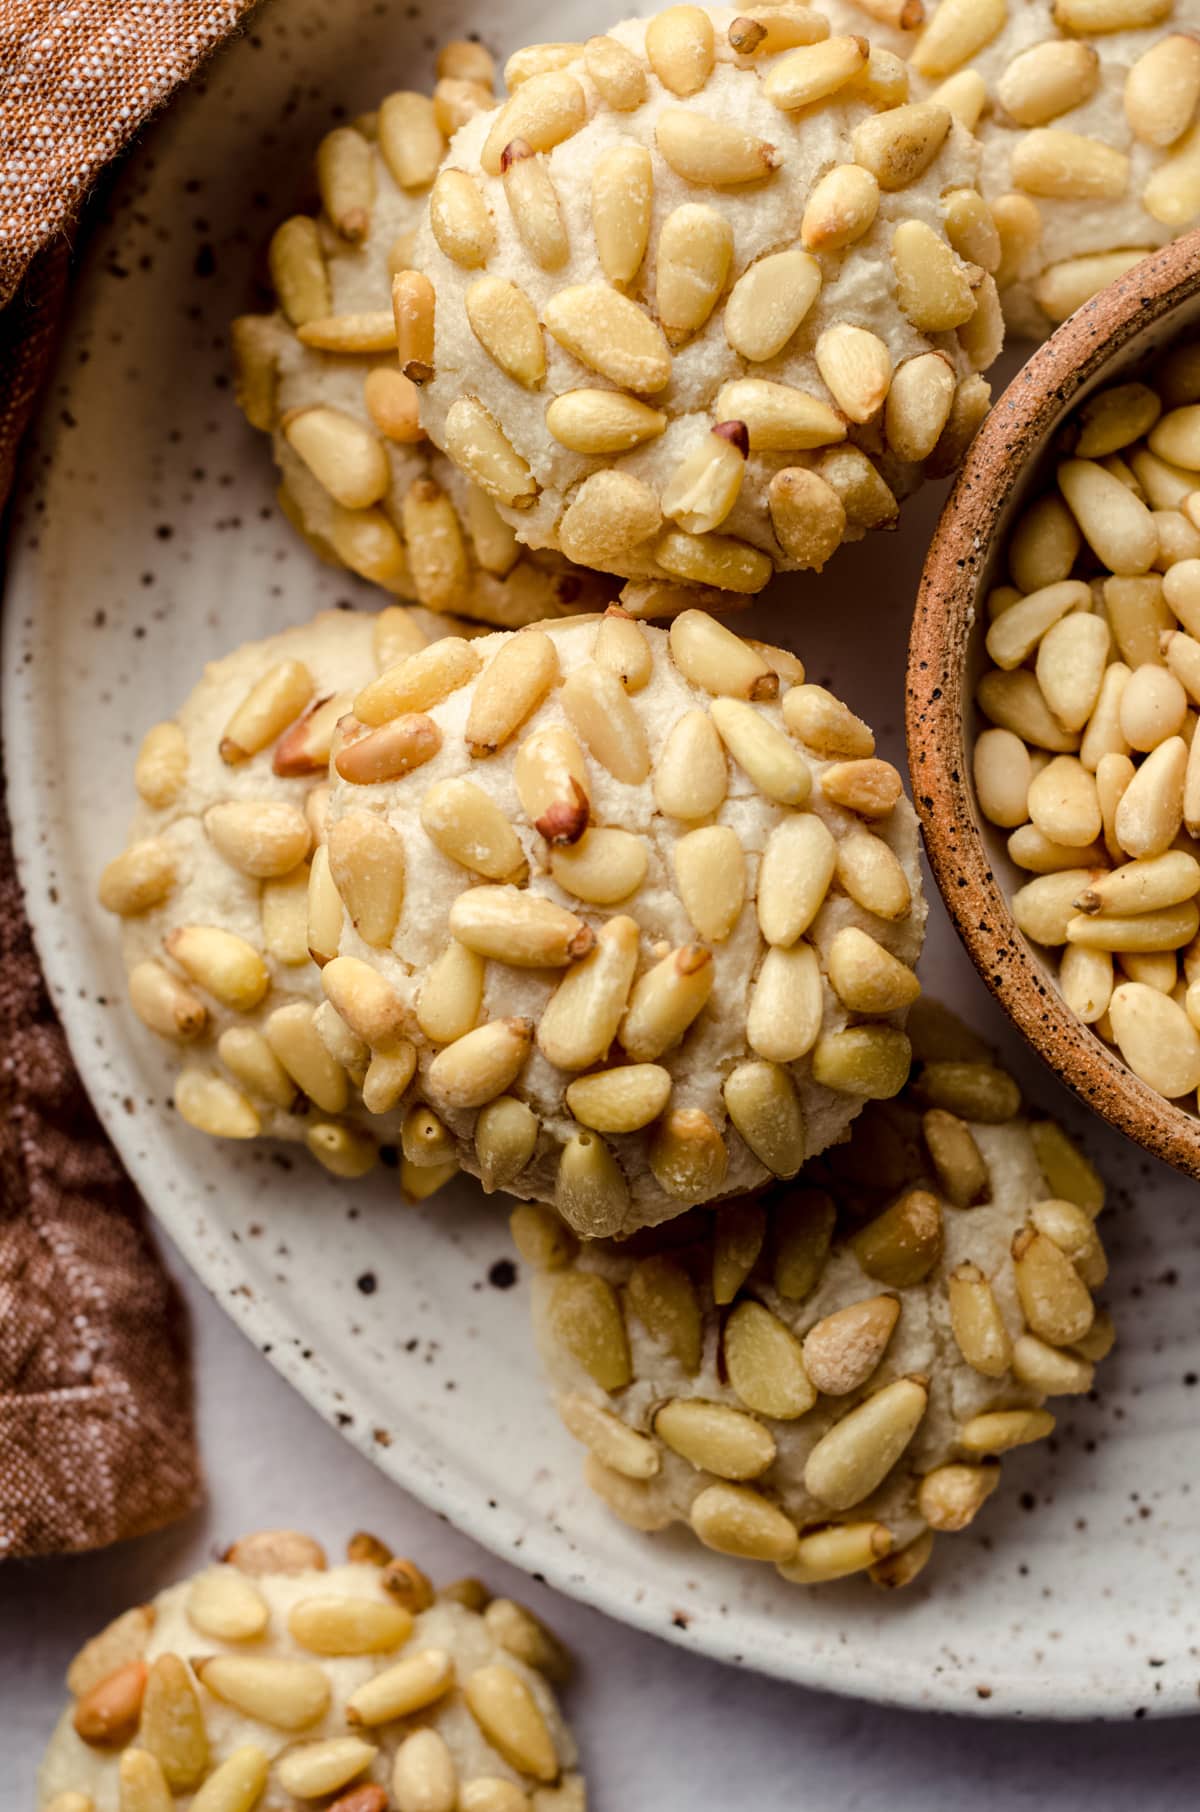 A plate of pignoli cookies coated in pine nuts.